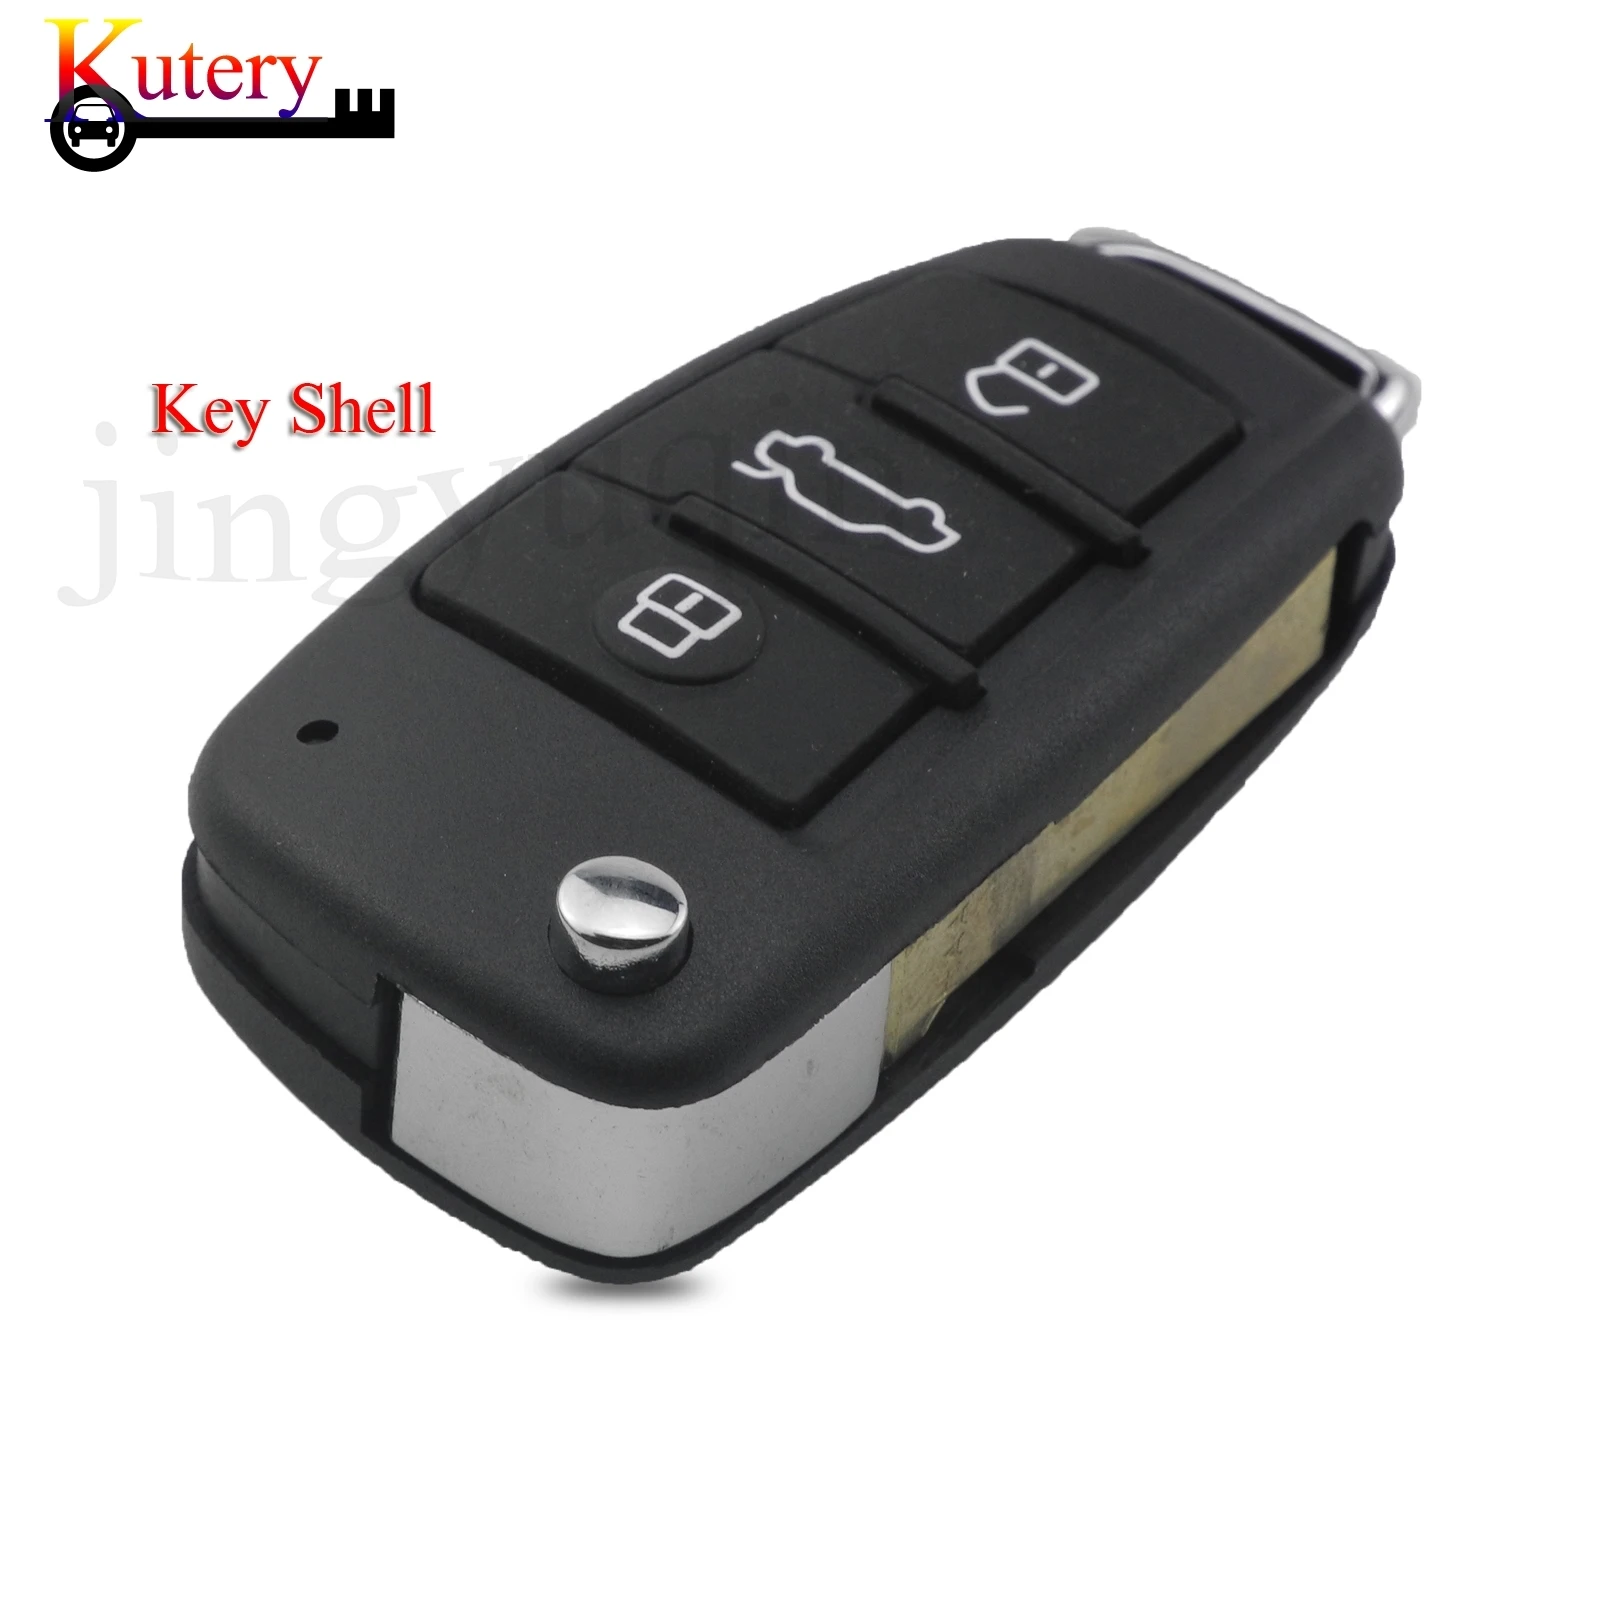 

jingyuqin Replacement Folding Remote Key Shell For Audi Q7 A3 TT A2 A8 A6 A6L A4 3 Buttons Key Case Cover Fob With Uncut blade